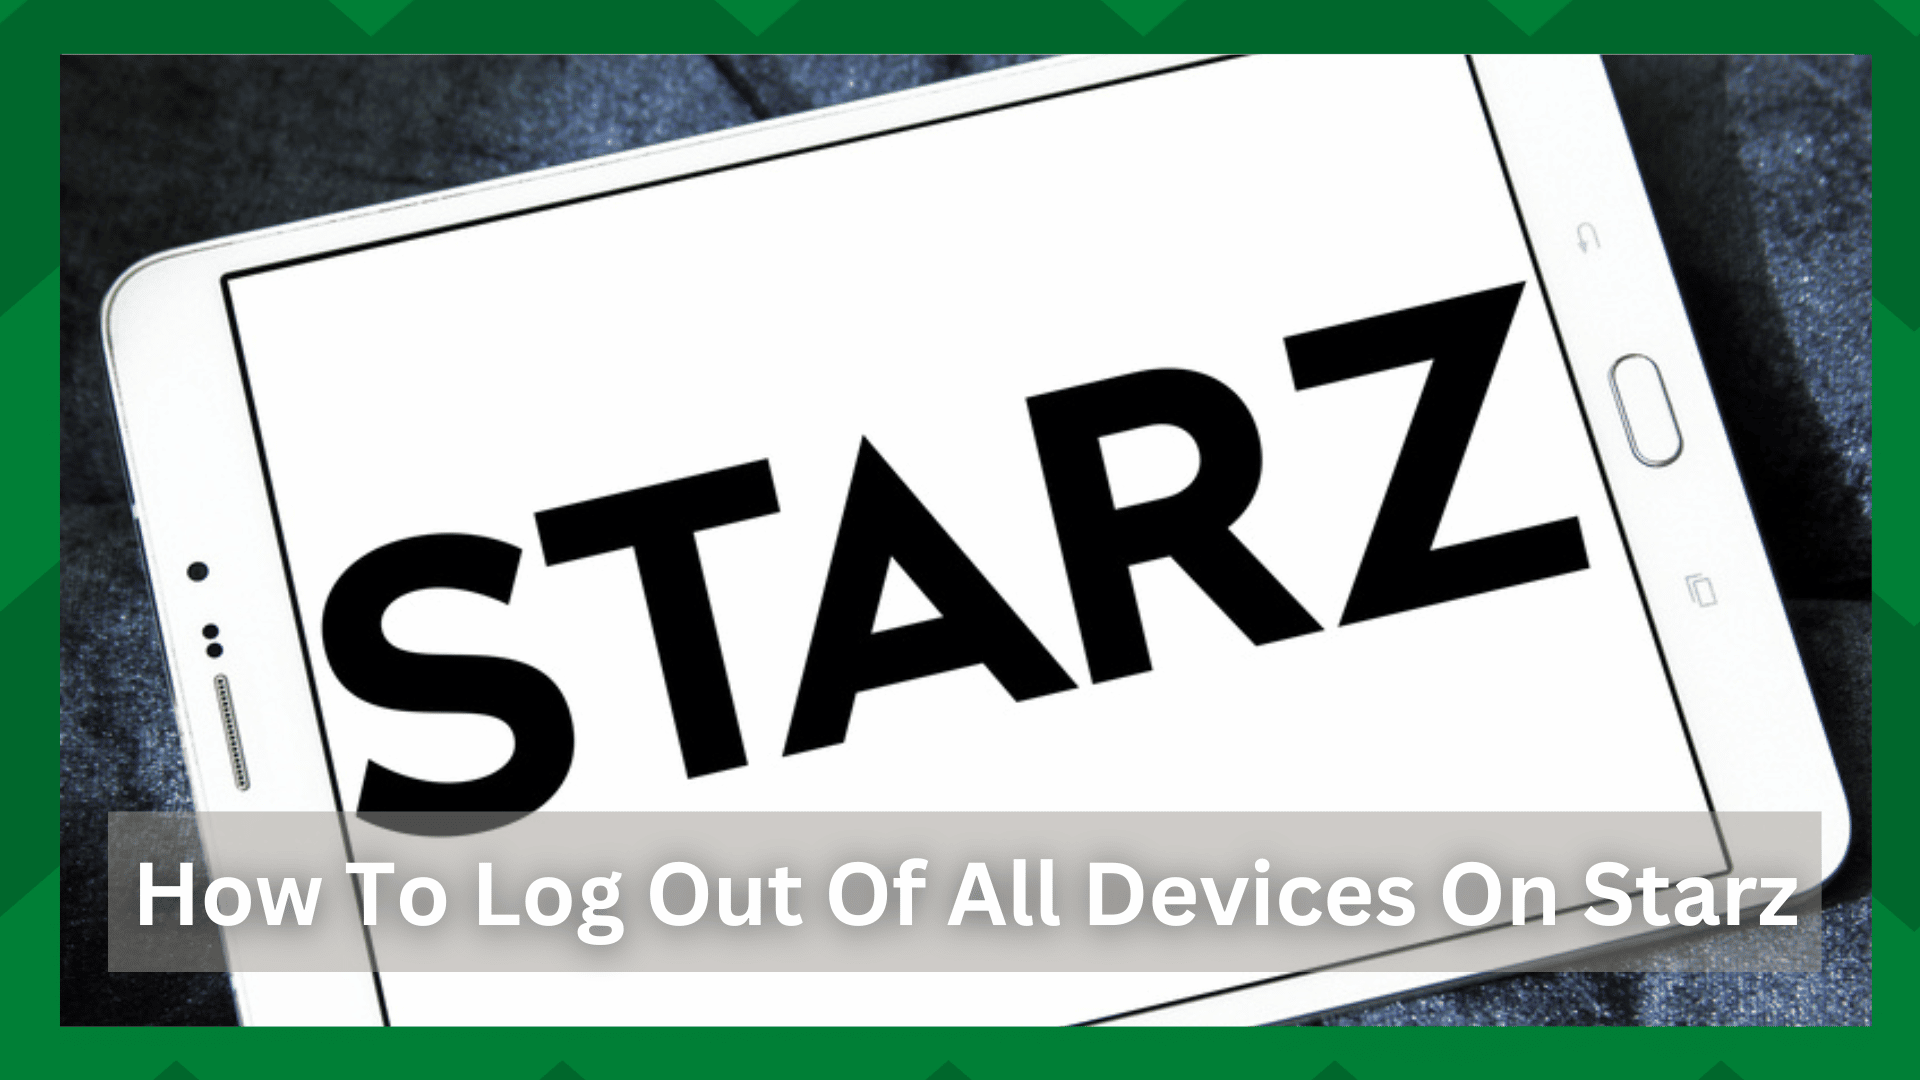 how to log out all devices on starz app